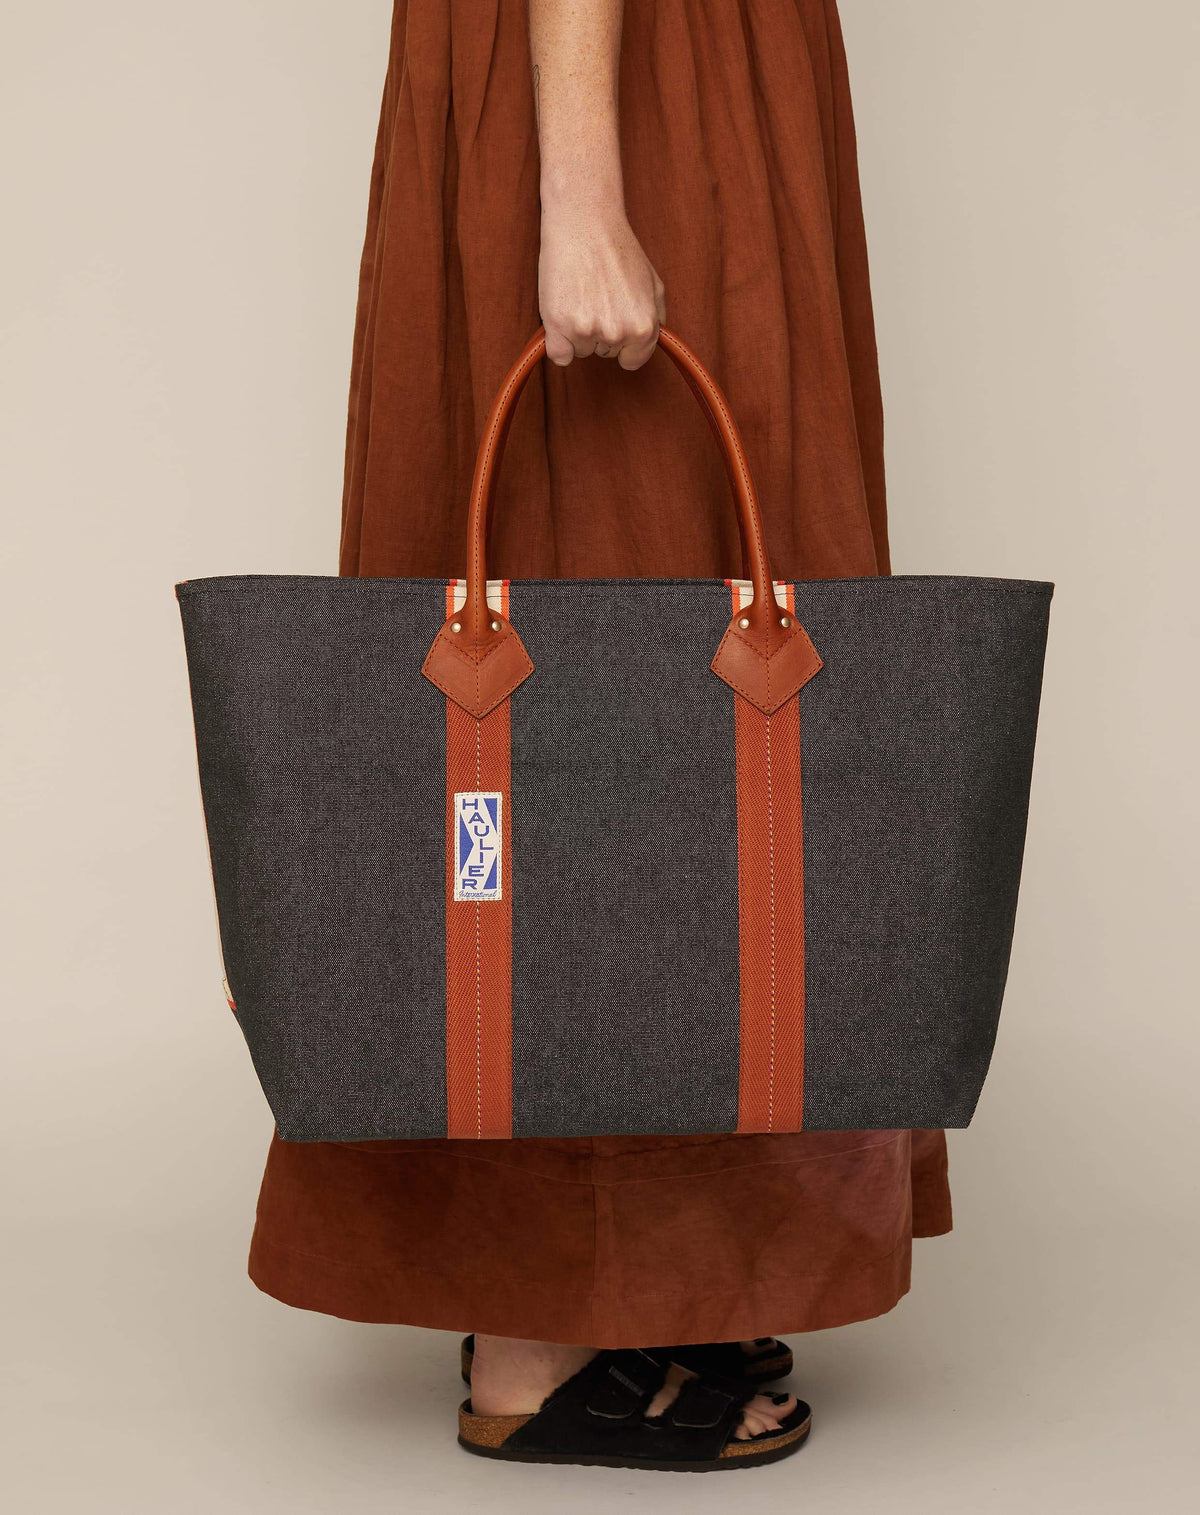 Image of person in brown skirt holding a classic canvas tote bag in washed black colour with tan leather handles and contrasting stripes.